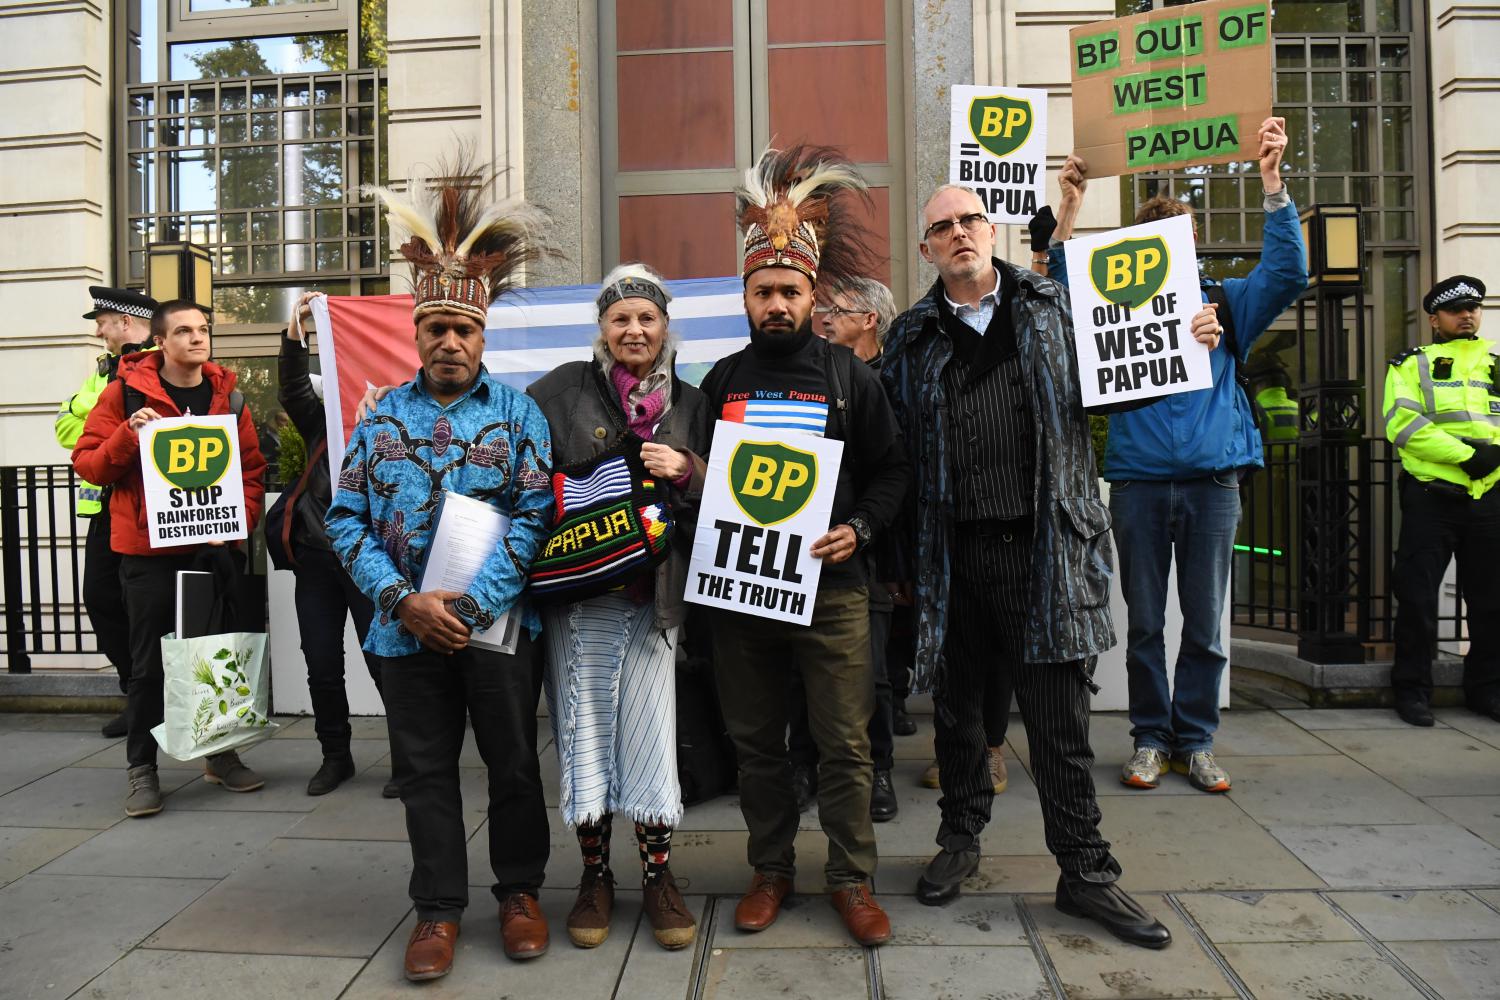 BP says its 80% in agreement with Extinction Rebellion 